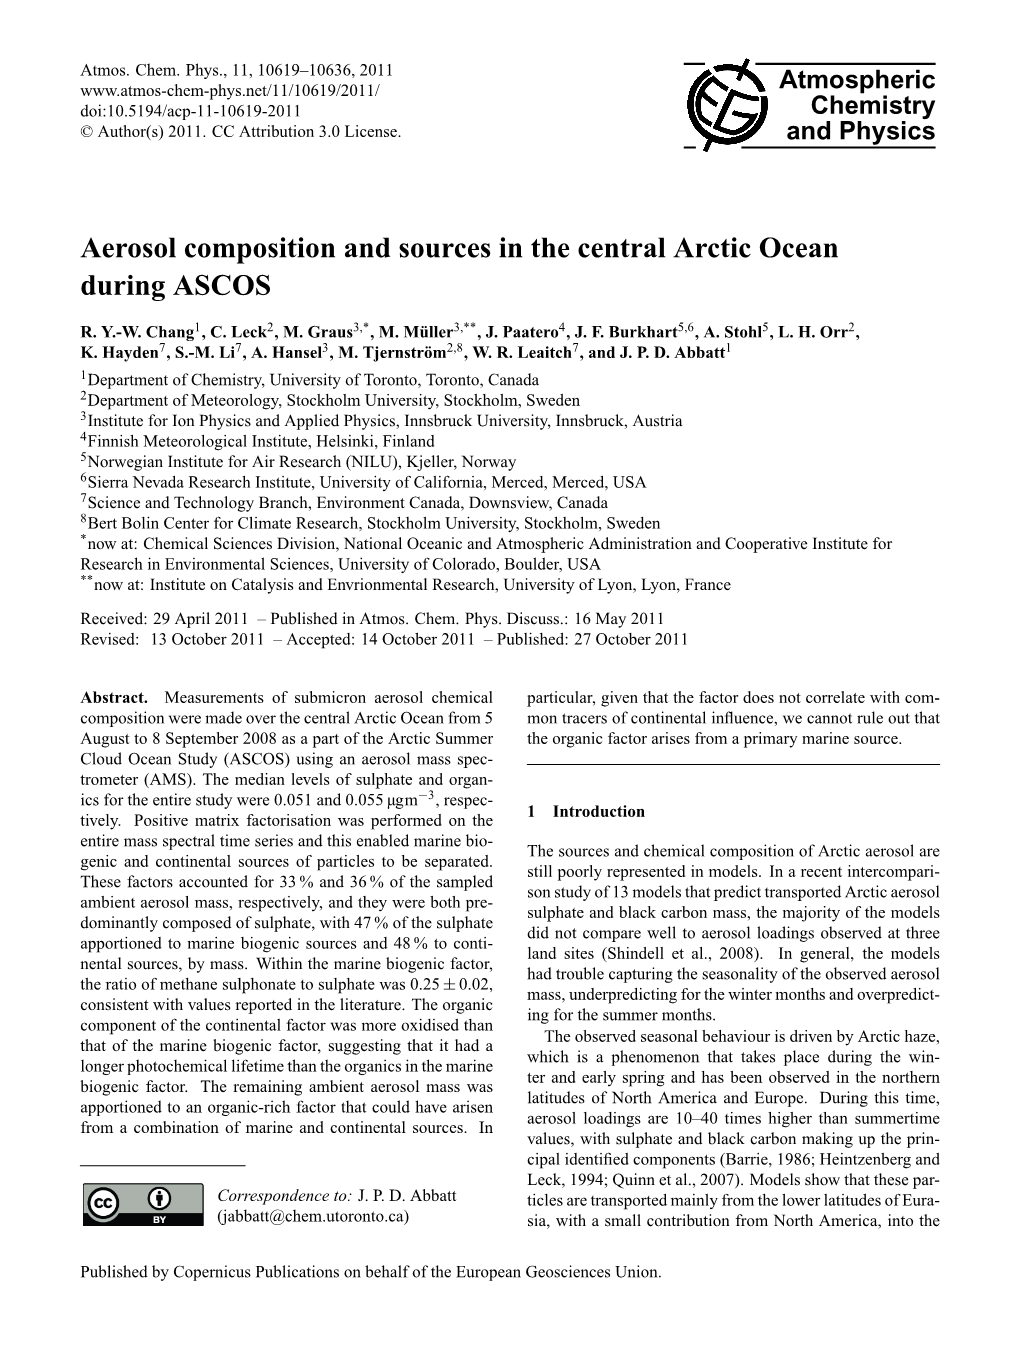 Aerosol Composition and Sources in the Central Arctic Ocean During ASCOS